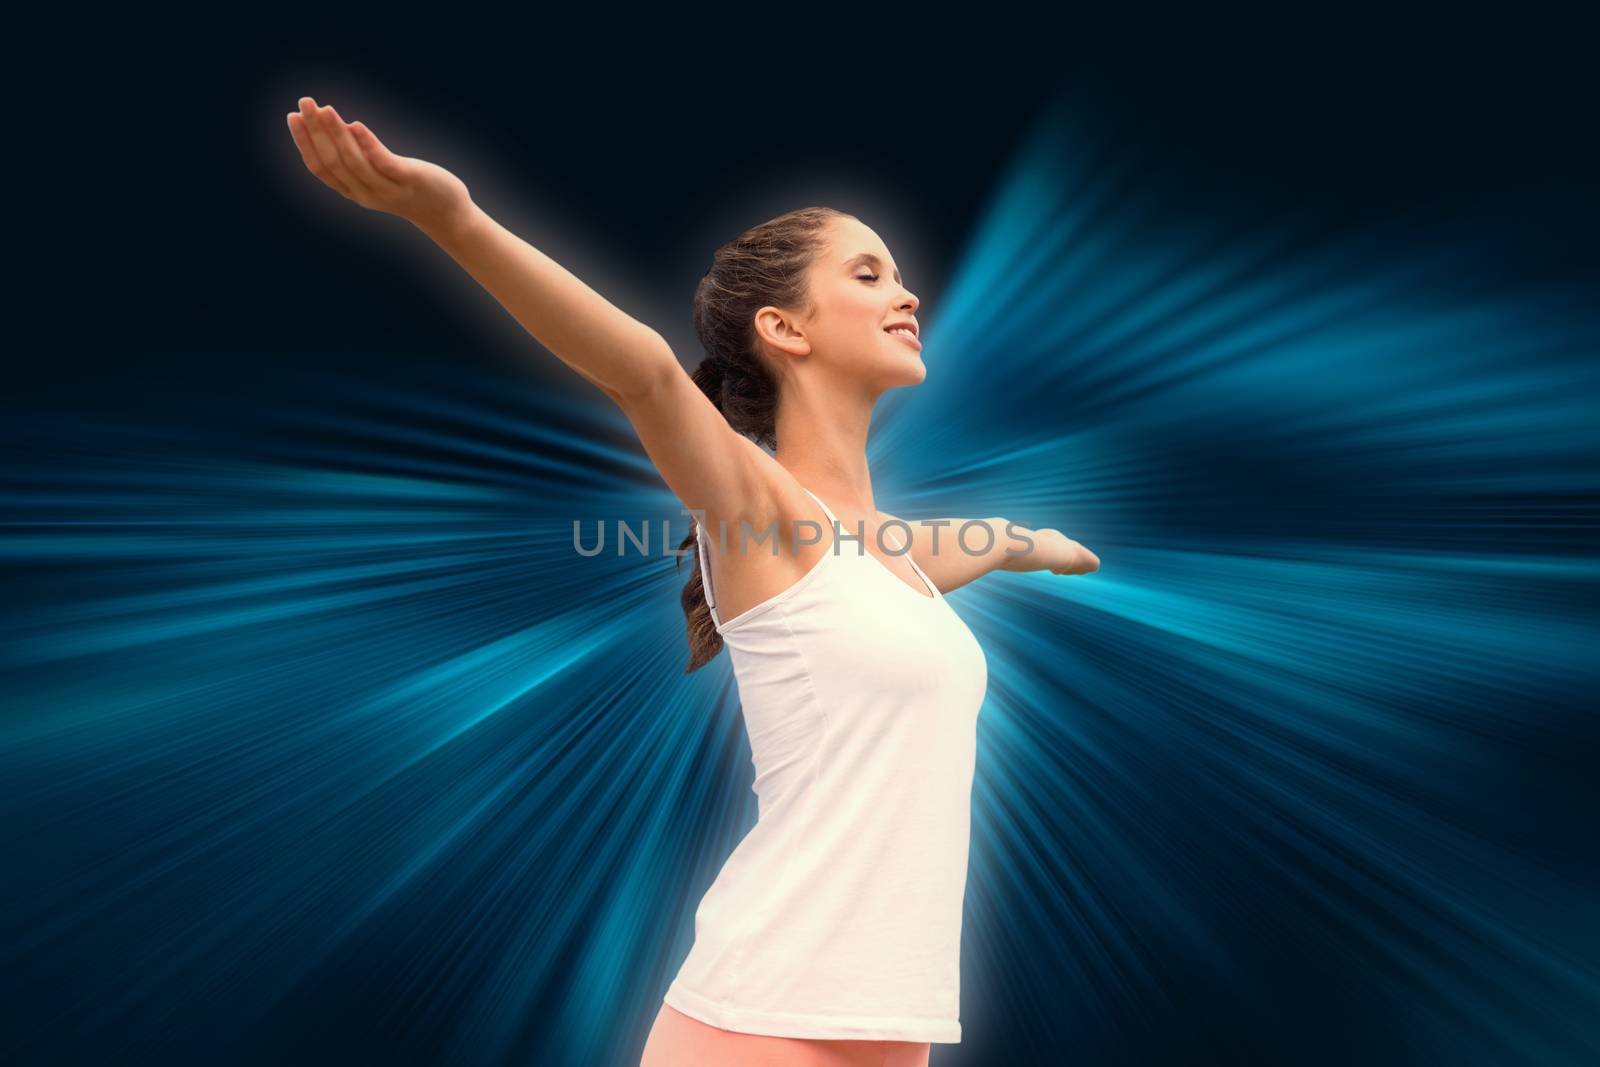 Beautiful woman with arms raised against sky against abstract background